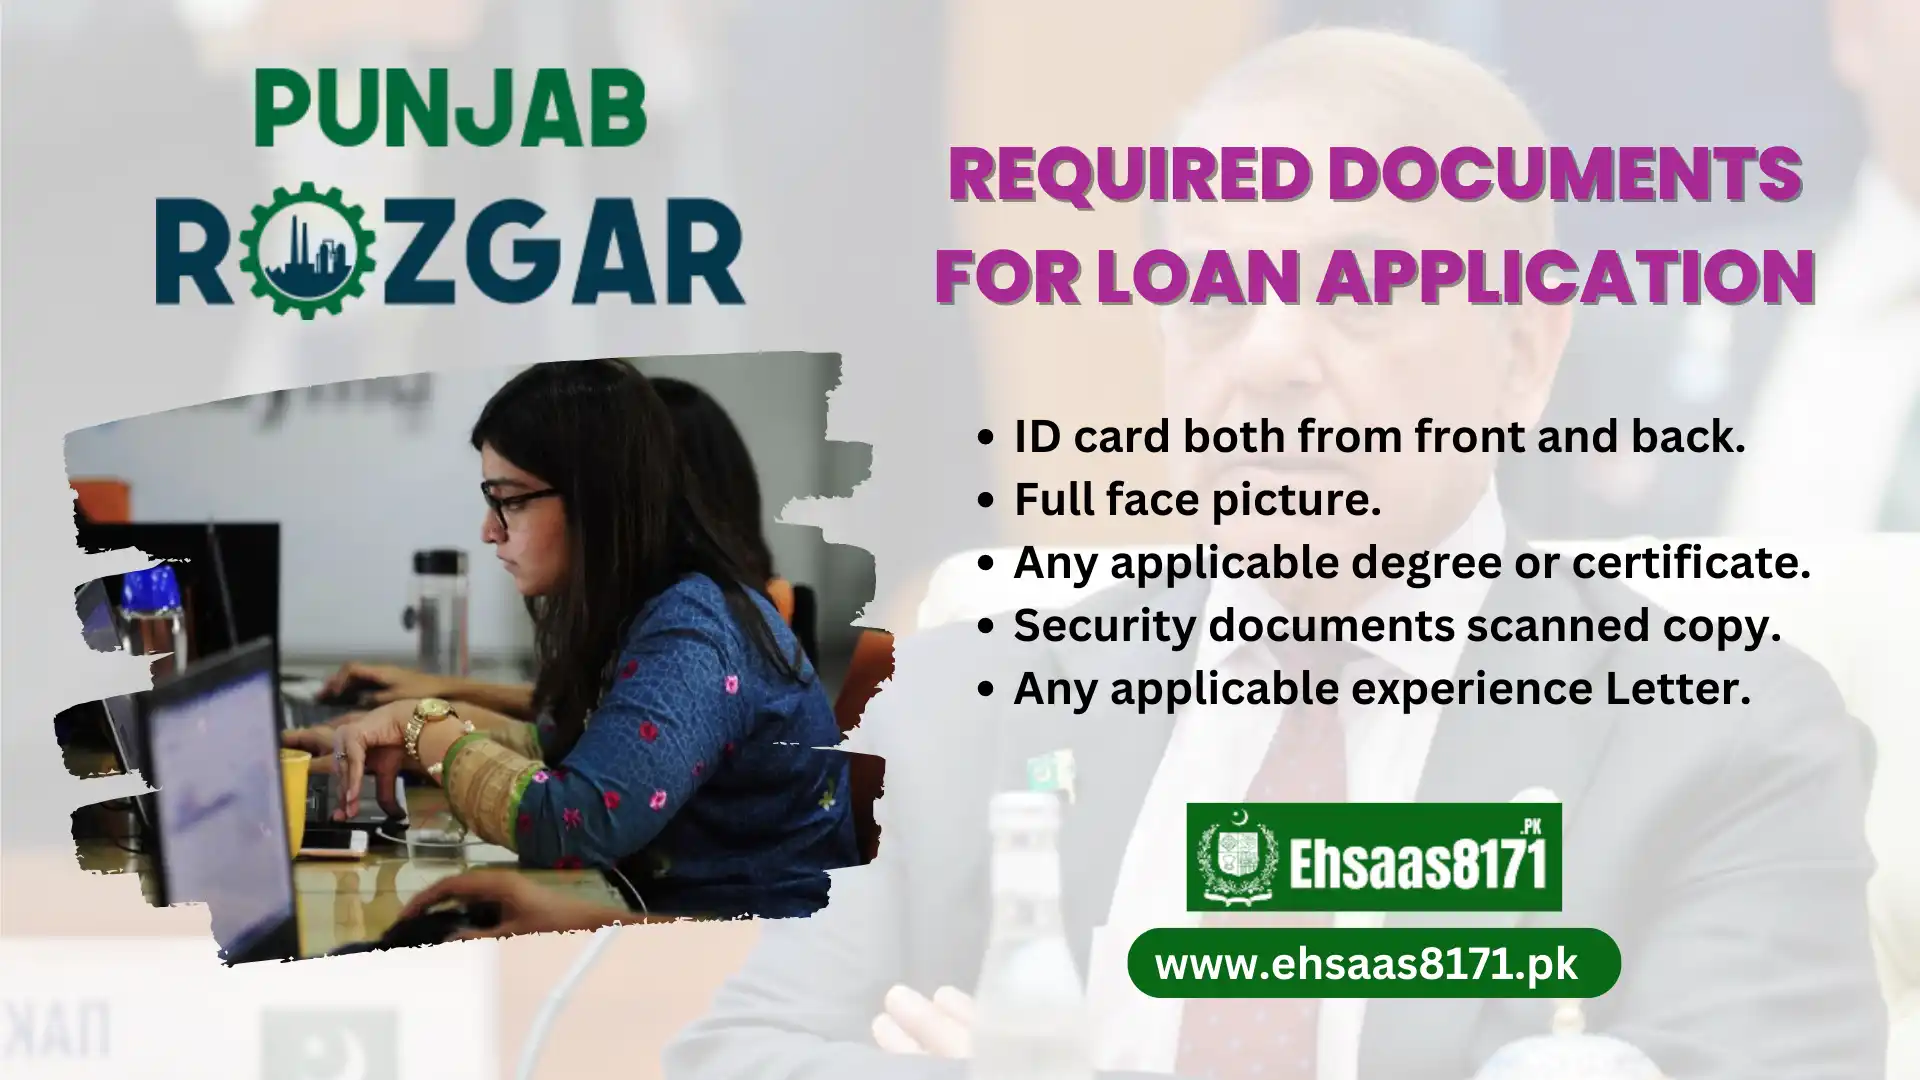 Required Documents for Loan Application